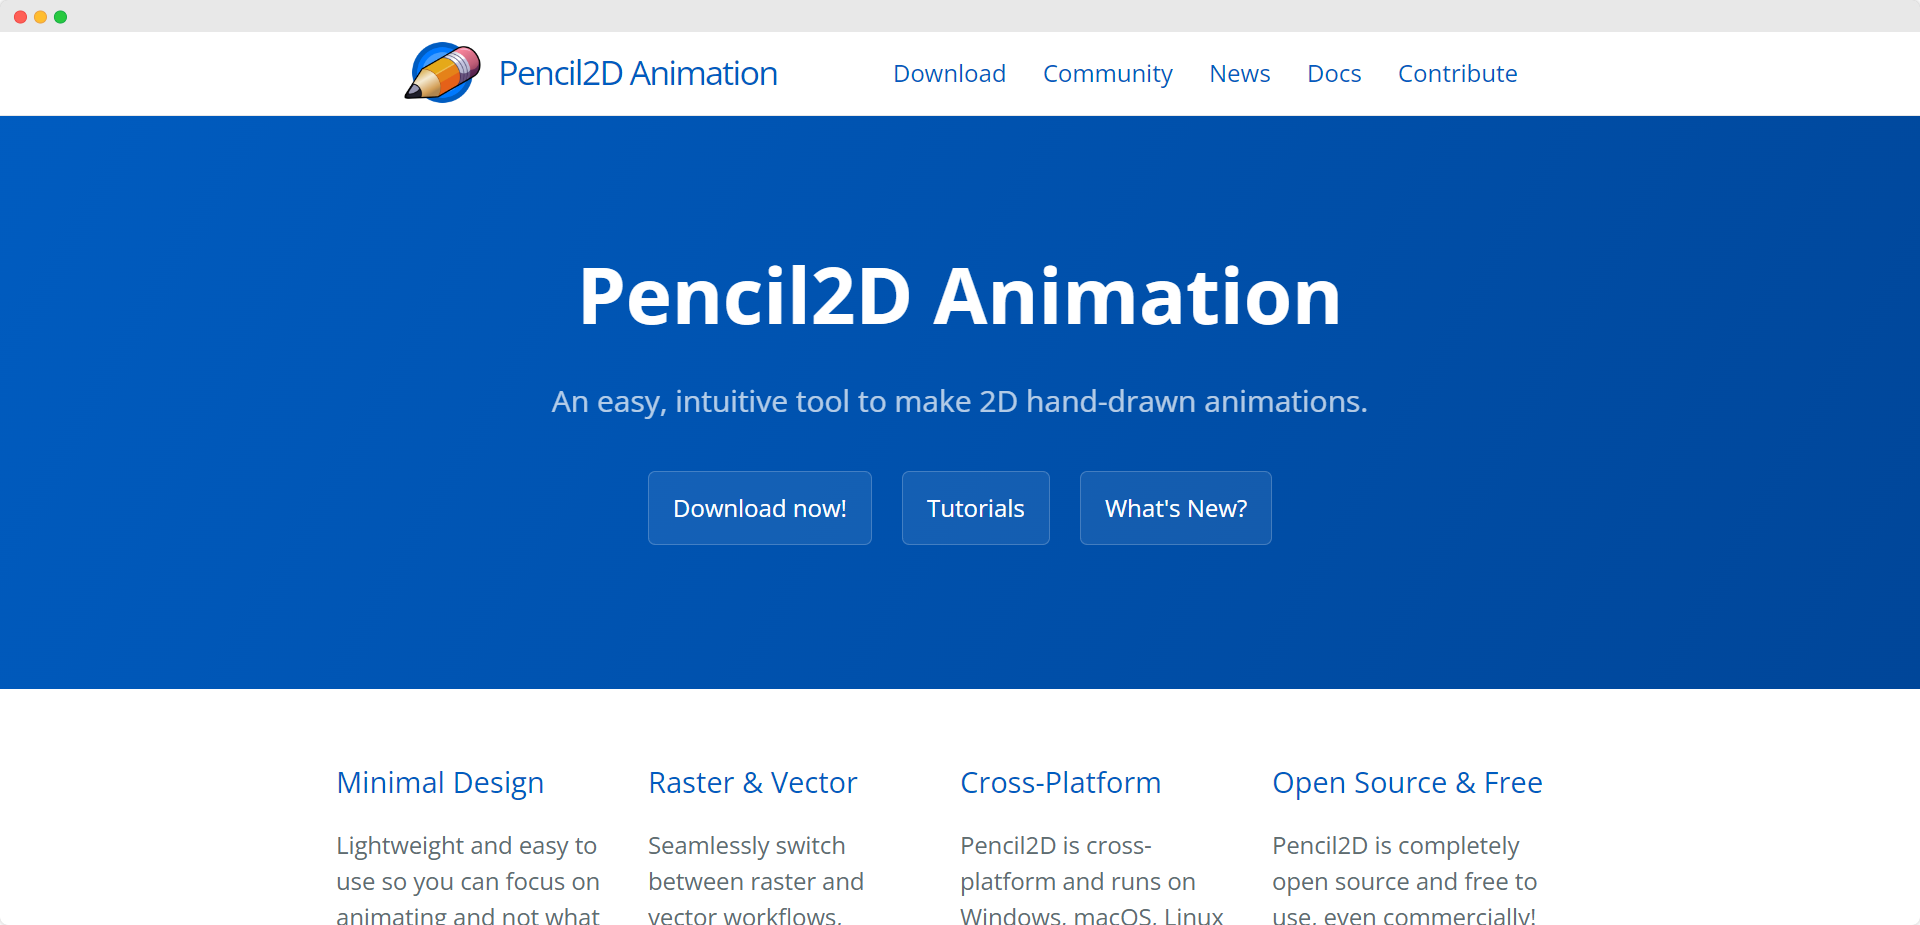 Pencil2D animation software